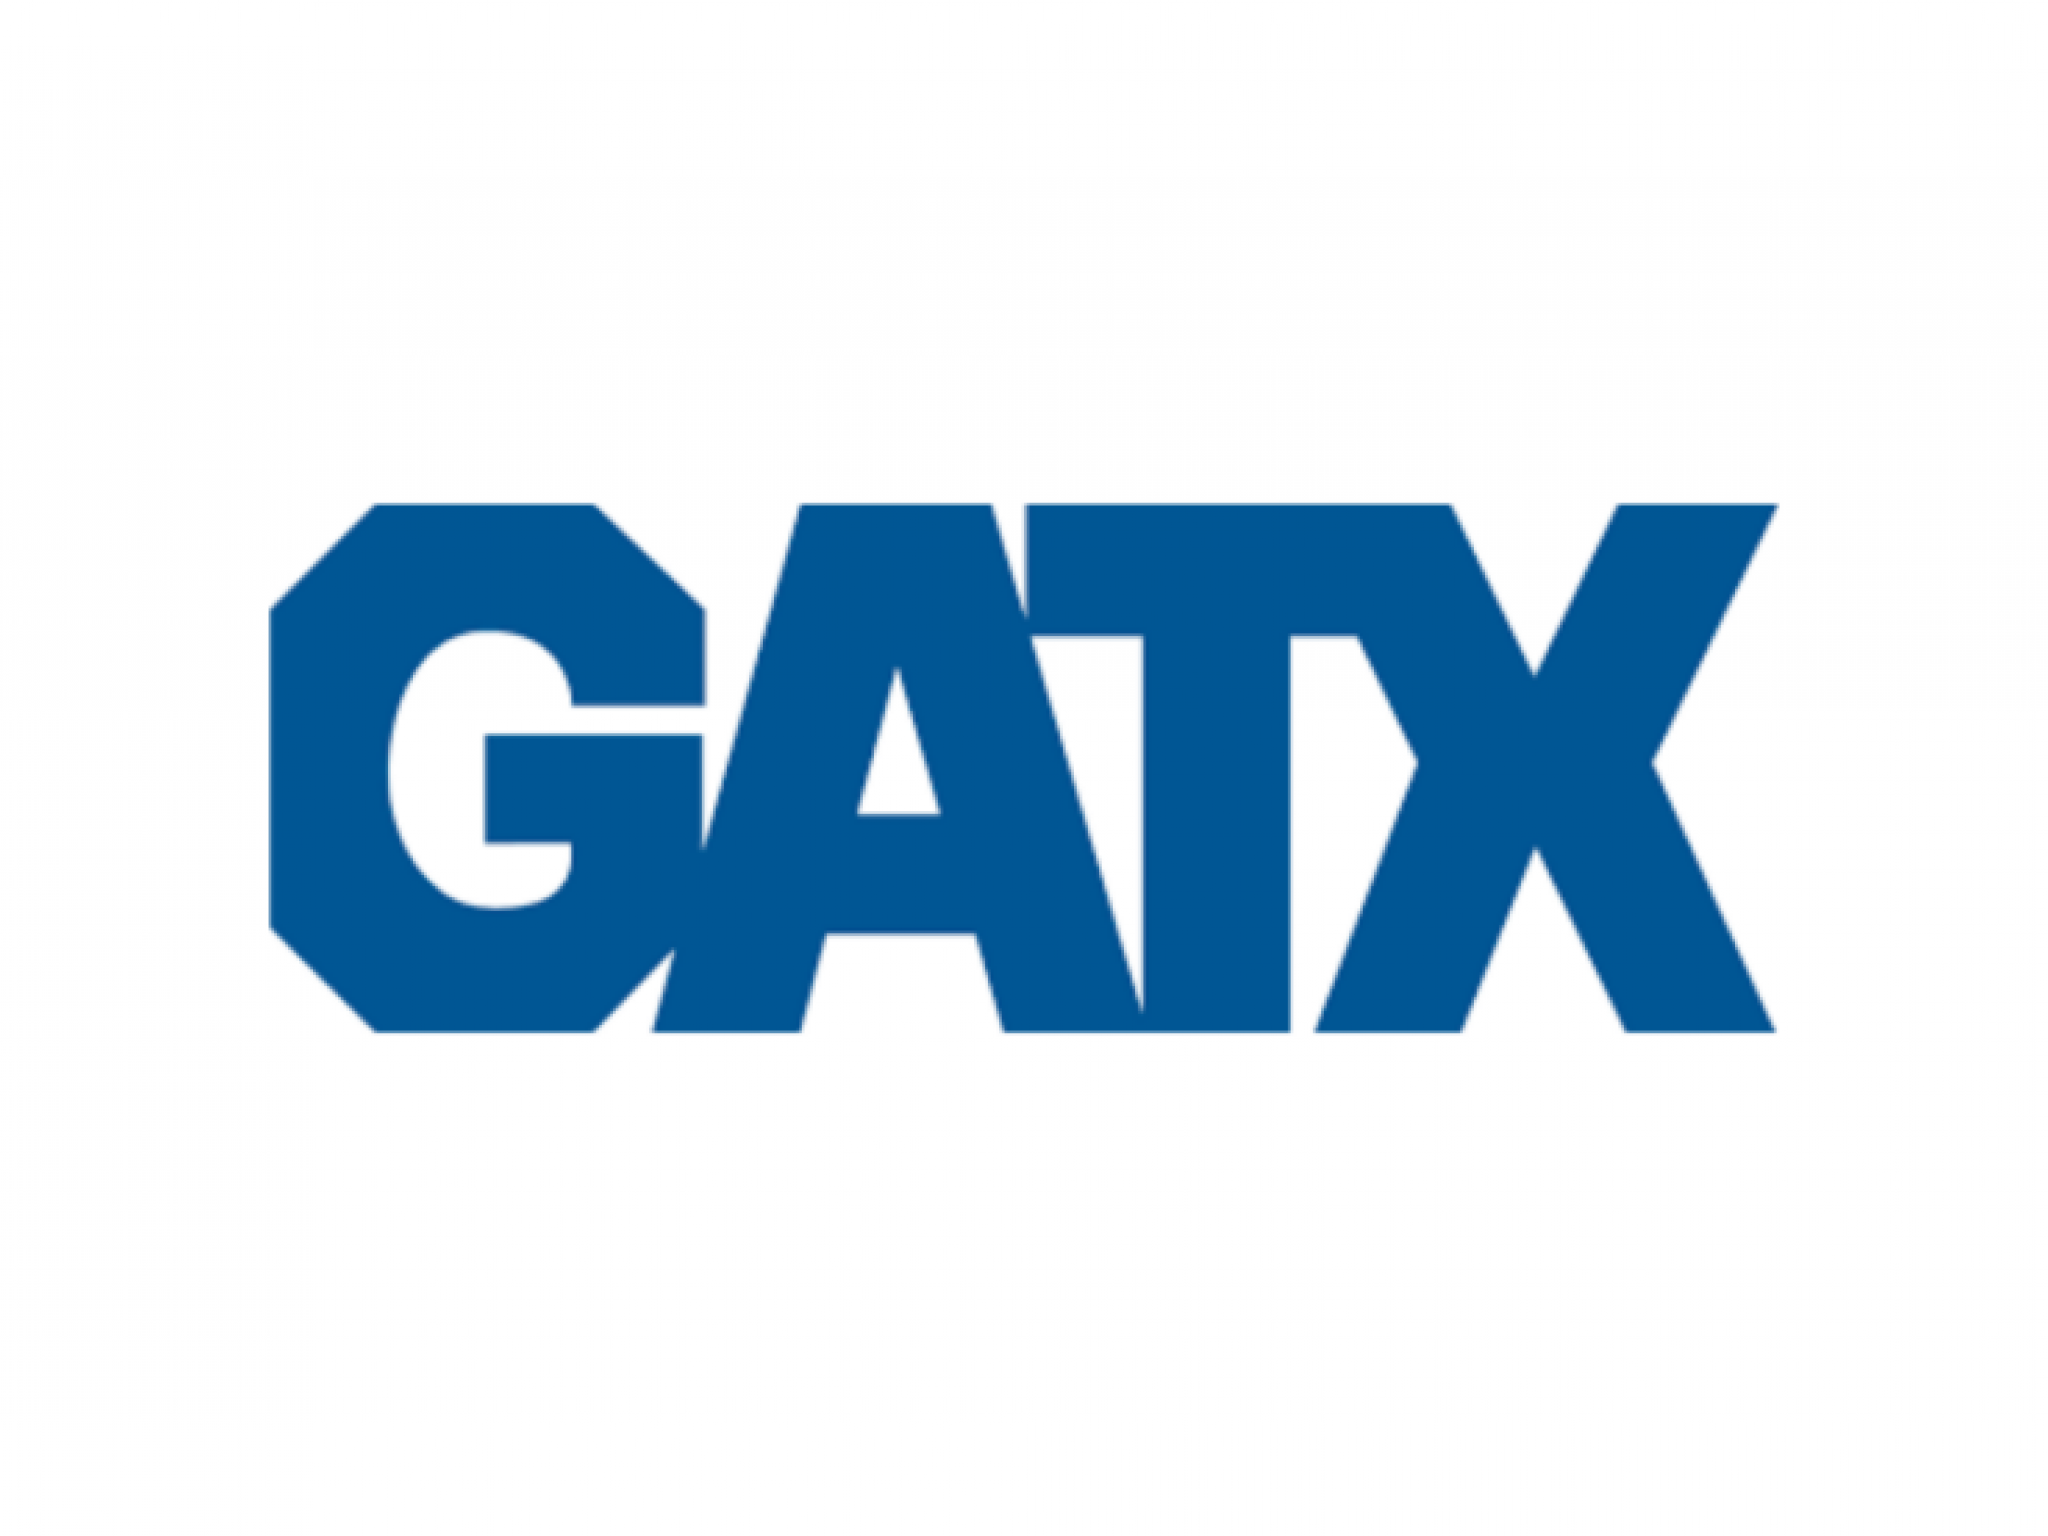  investor-optimism-soars-on-gatx-shares-up-after-favorable-outlook-for-aircraft-spare-engine-demand-q4-earnings-beat 